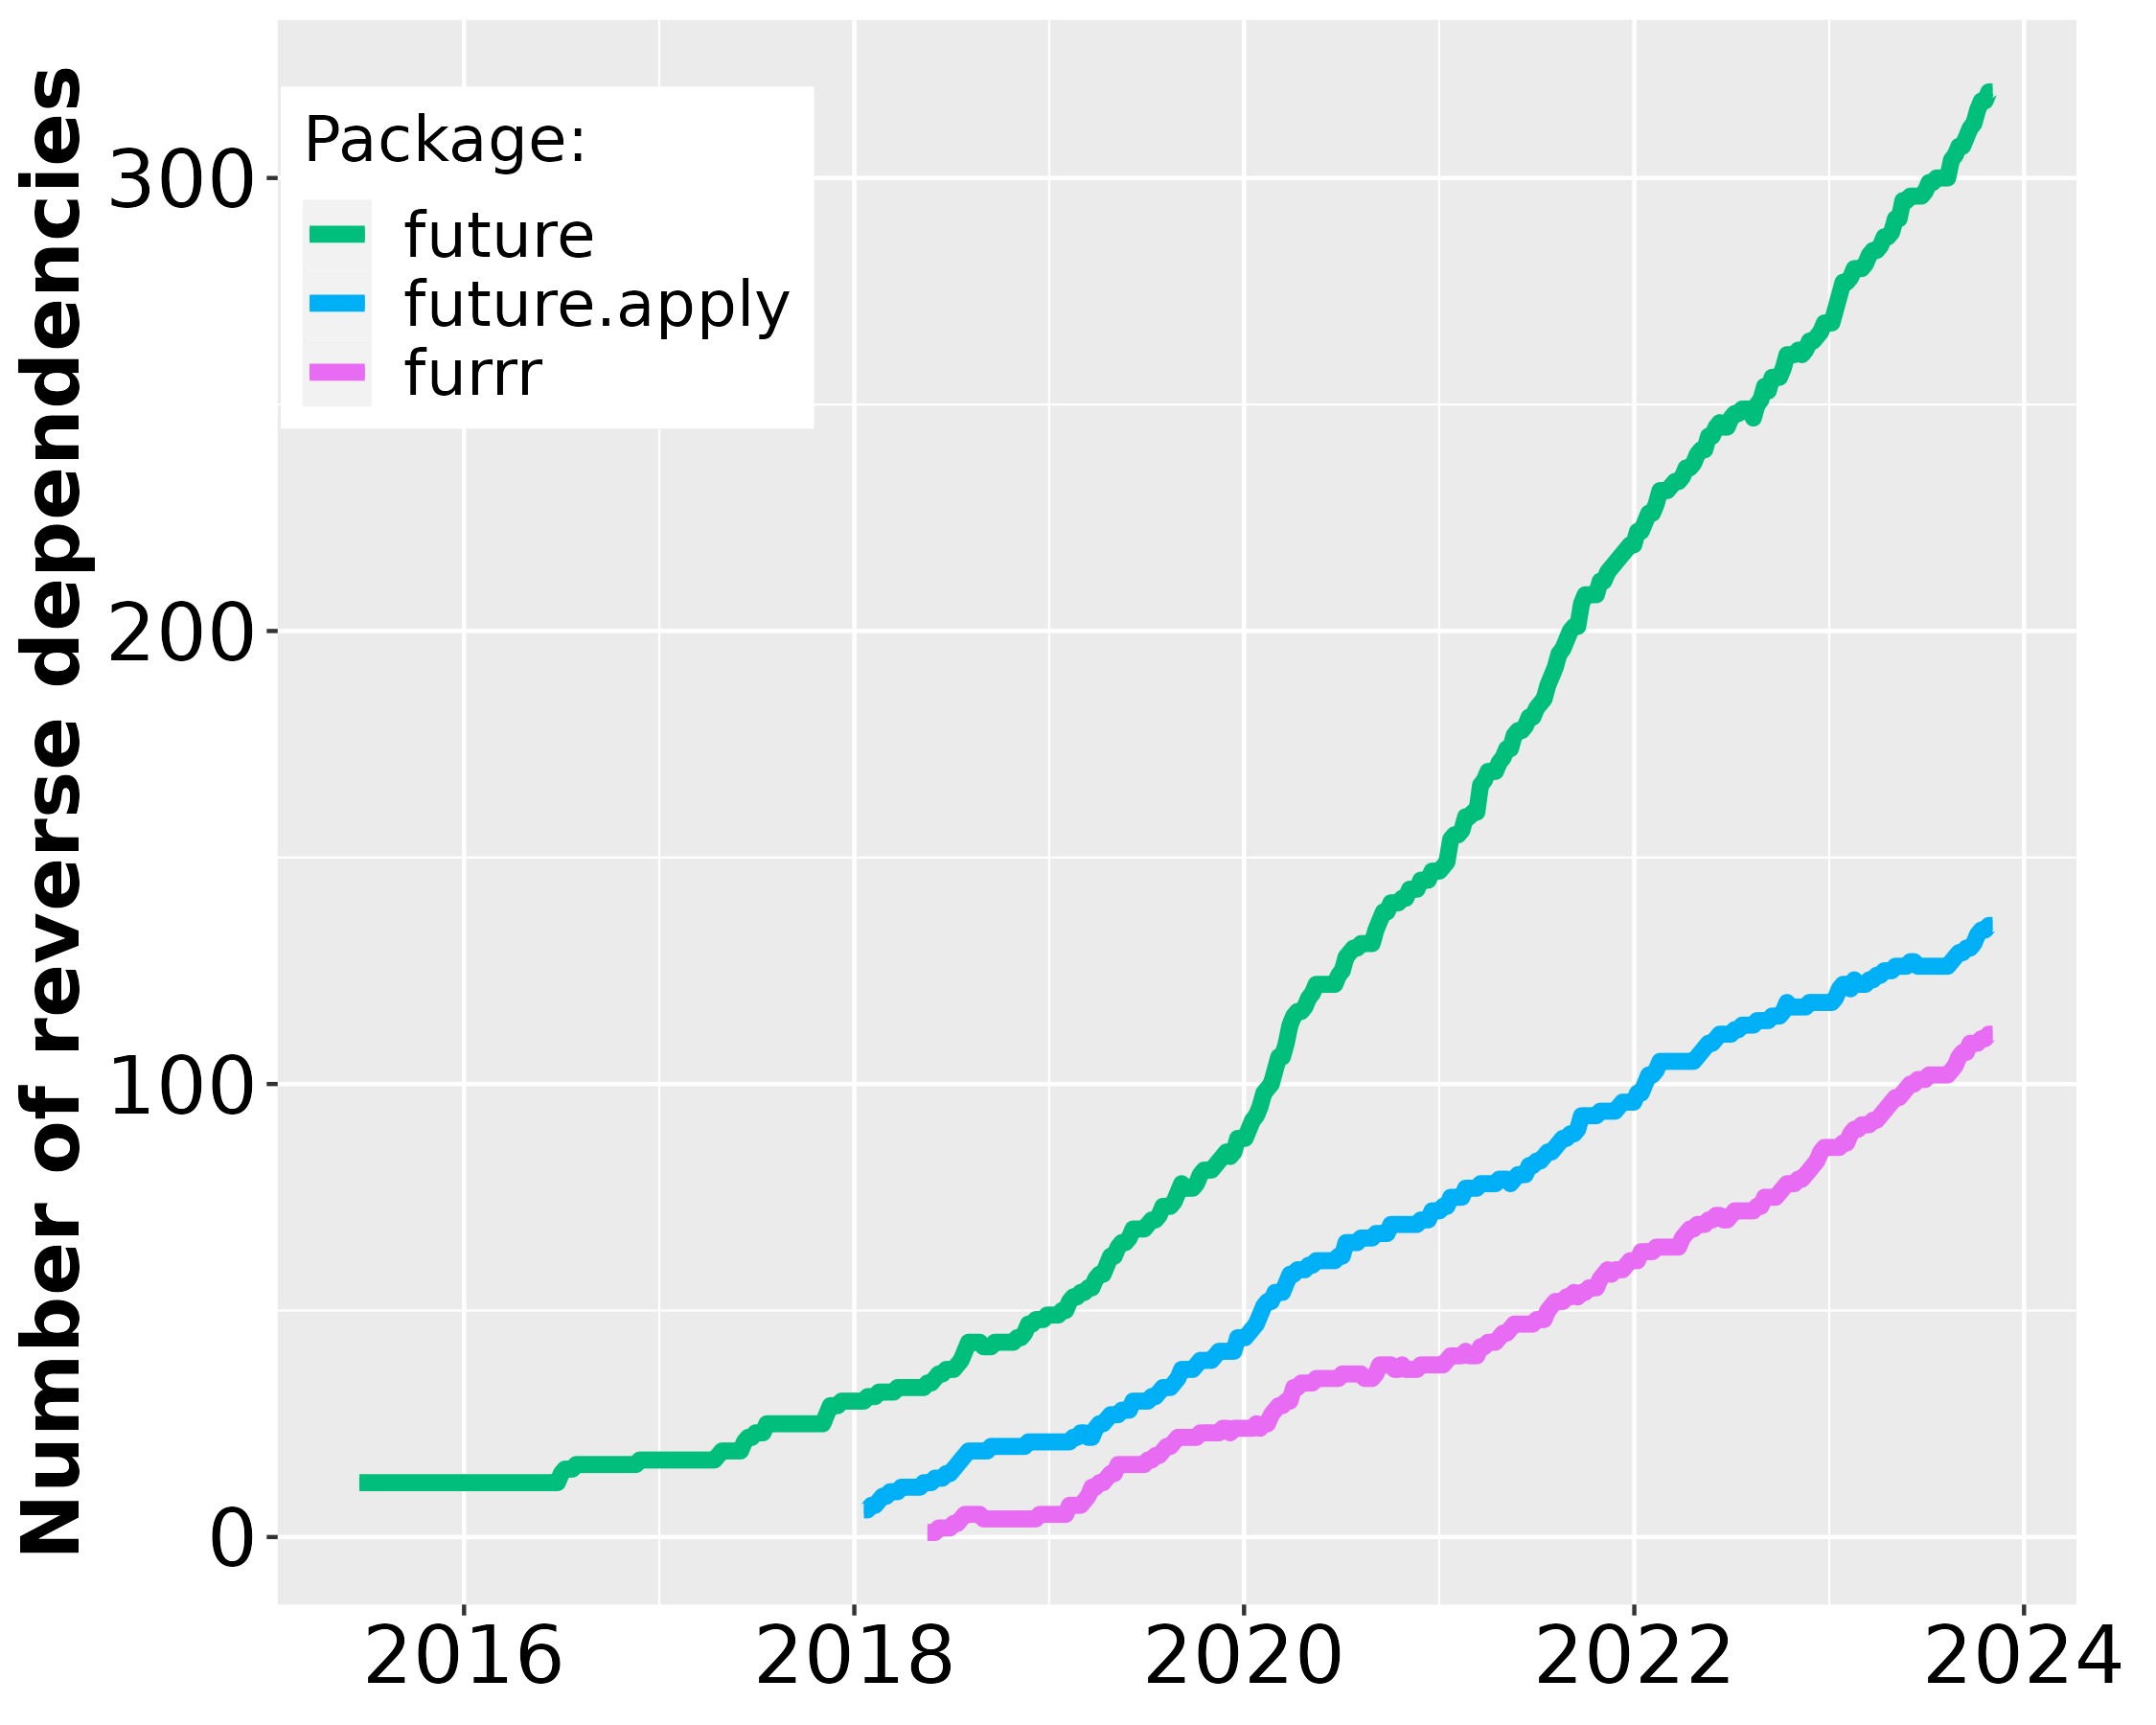 A line graph with 2015-2023 on the horizontal axis and 'Number of reverse dependencies' on the vertical axis. Rapidly growing curves for three packages, 'future', 'future.apply', and 'furrr', are shown with 'future' increasing the fastest.